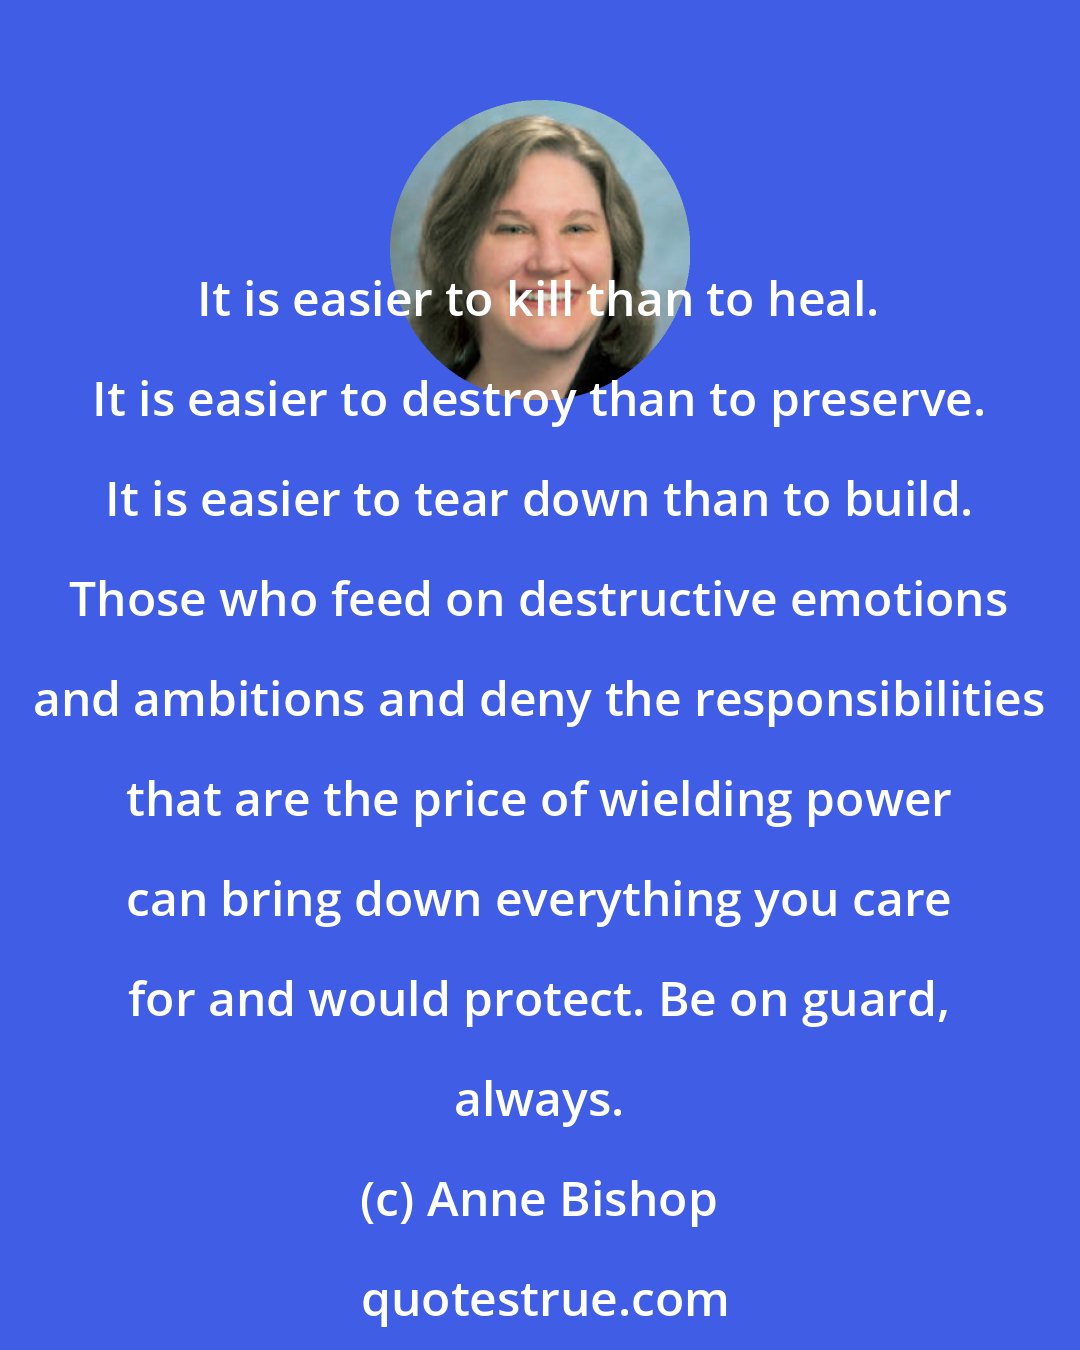 Anne Bishop: It is easier to kill than to heal. It is easier to destroy than to preserve. It is easier to tear down than to build. Those who feed on destructive emotions and ambitions and deny the responsibilities that are the price of wielding power can bring down everything you care for and would protect. Be on guard, always.